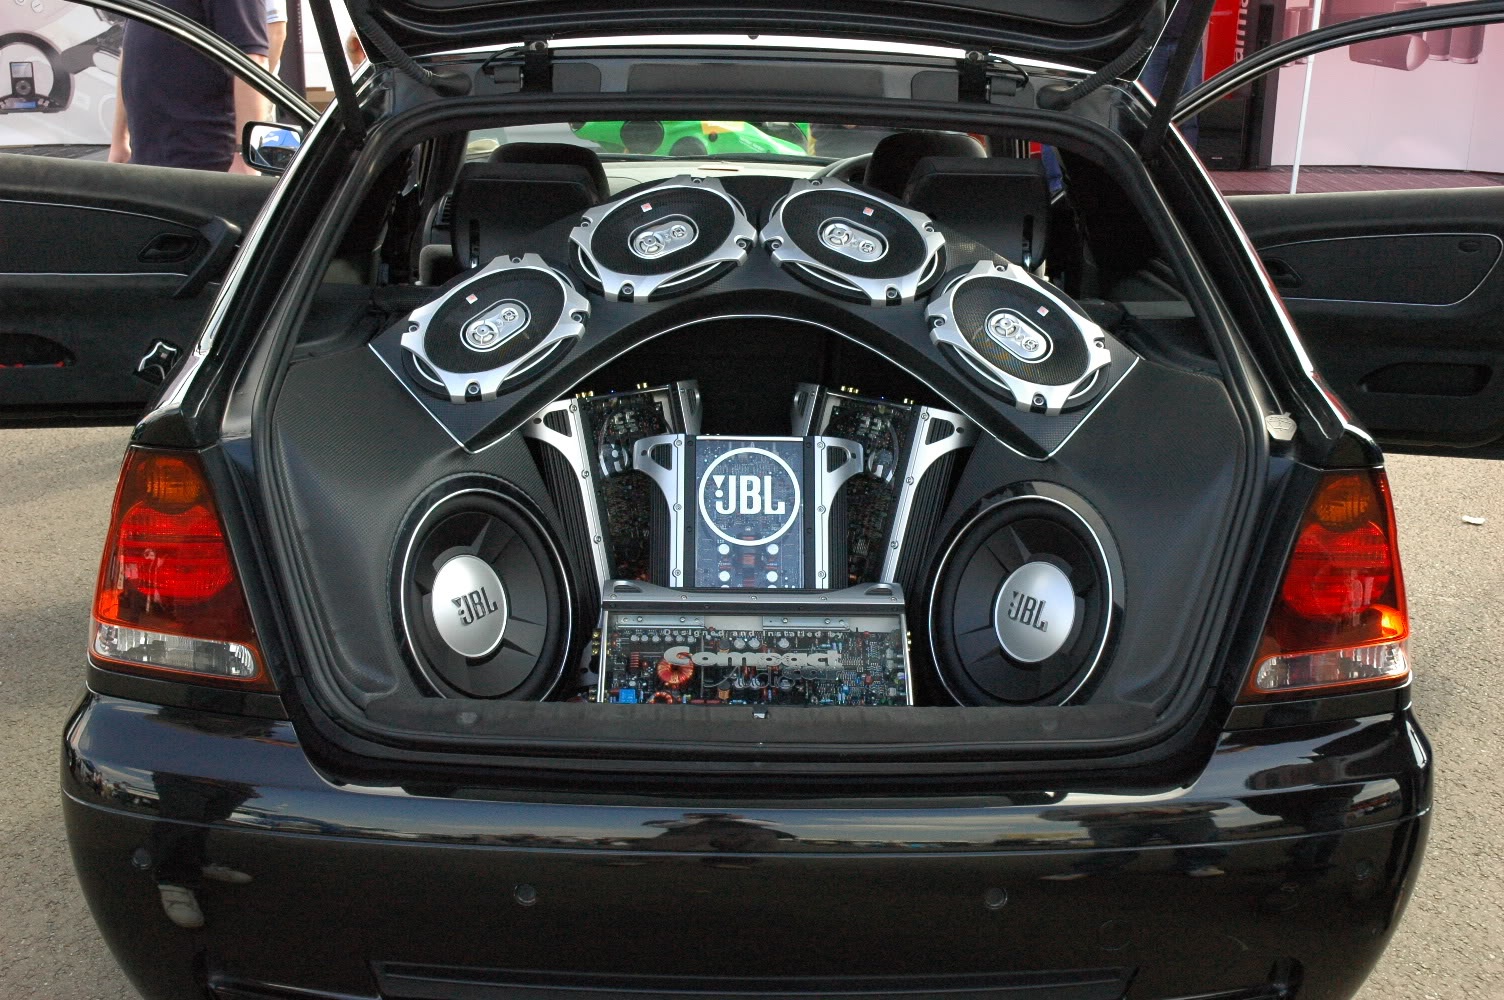 Car audio system overview for your understanding